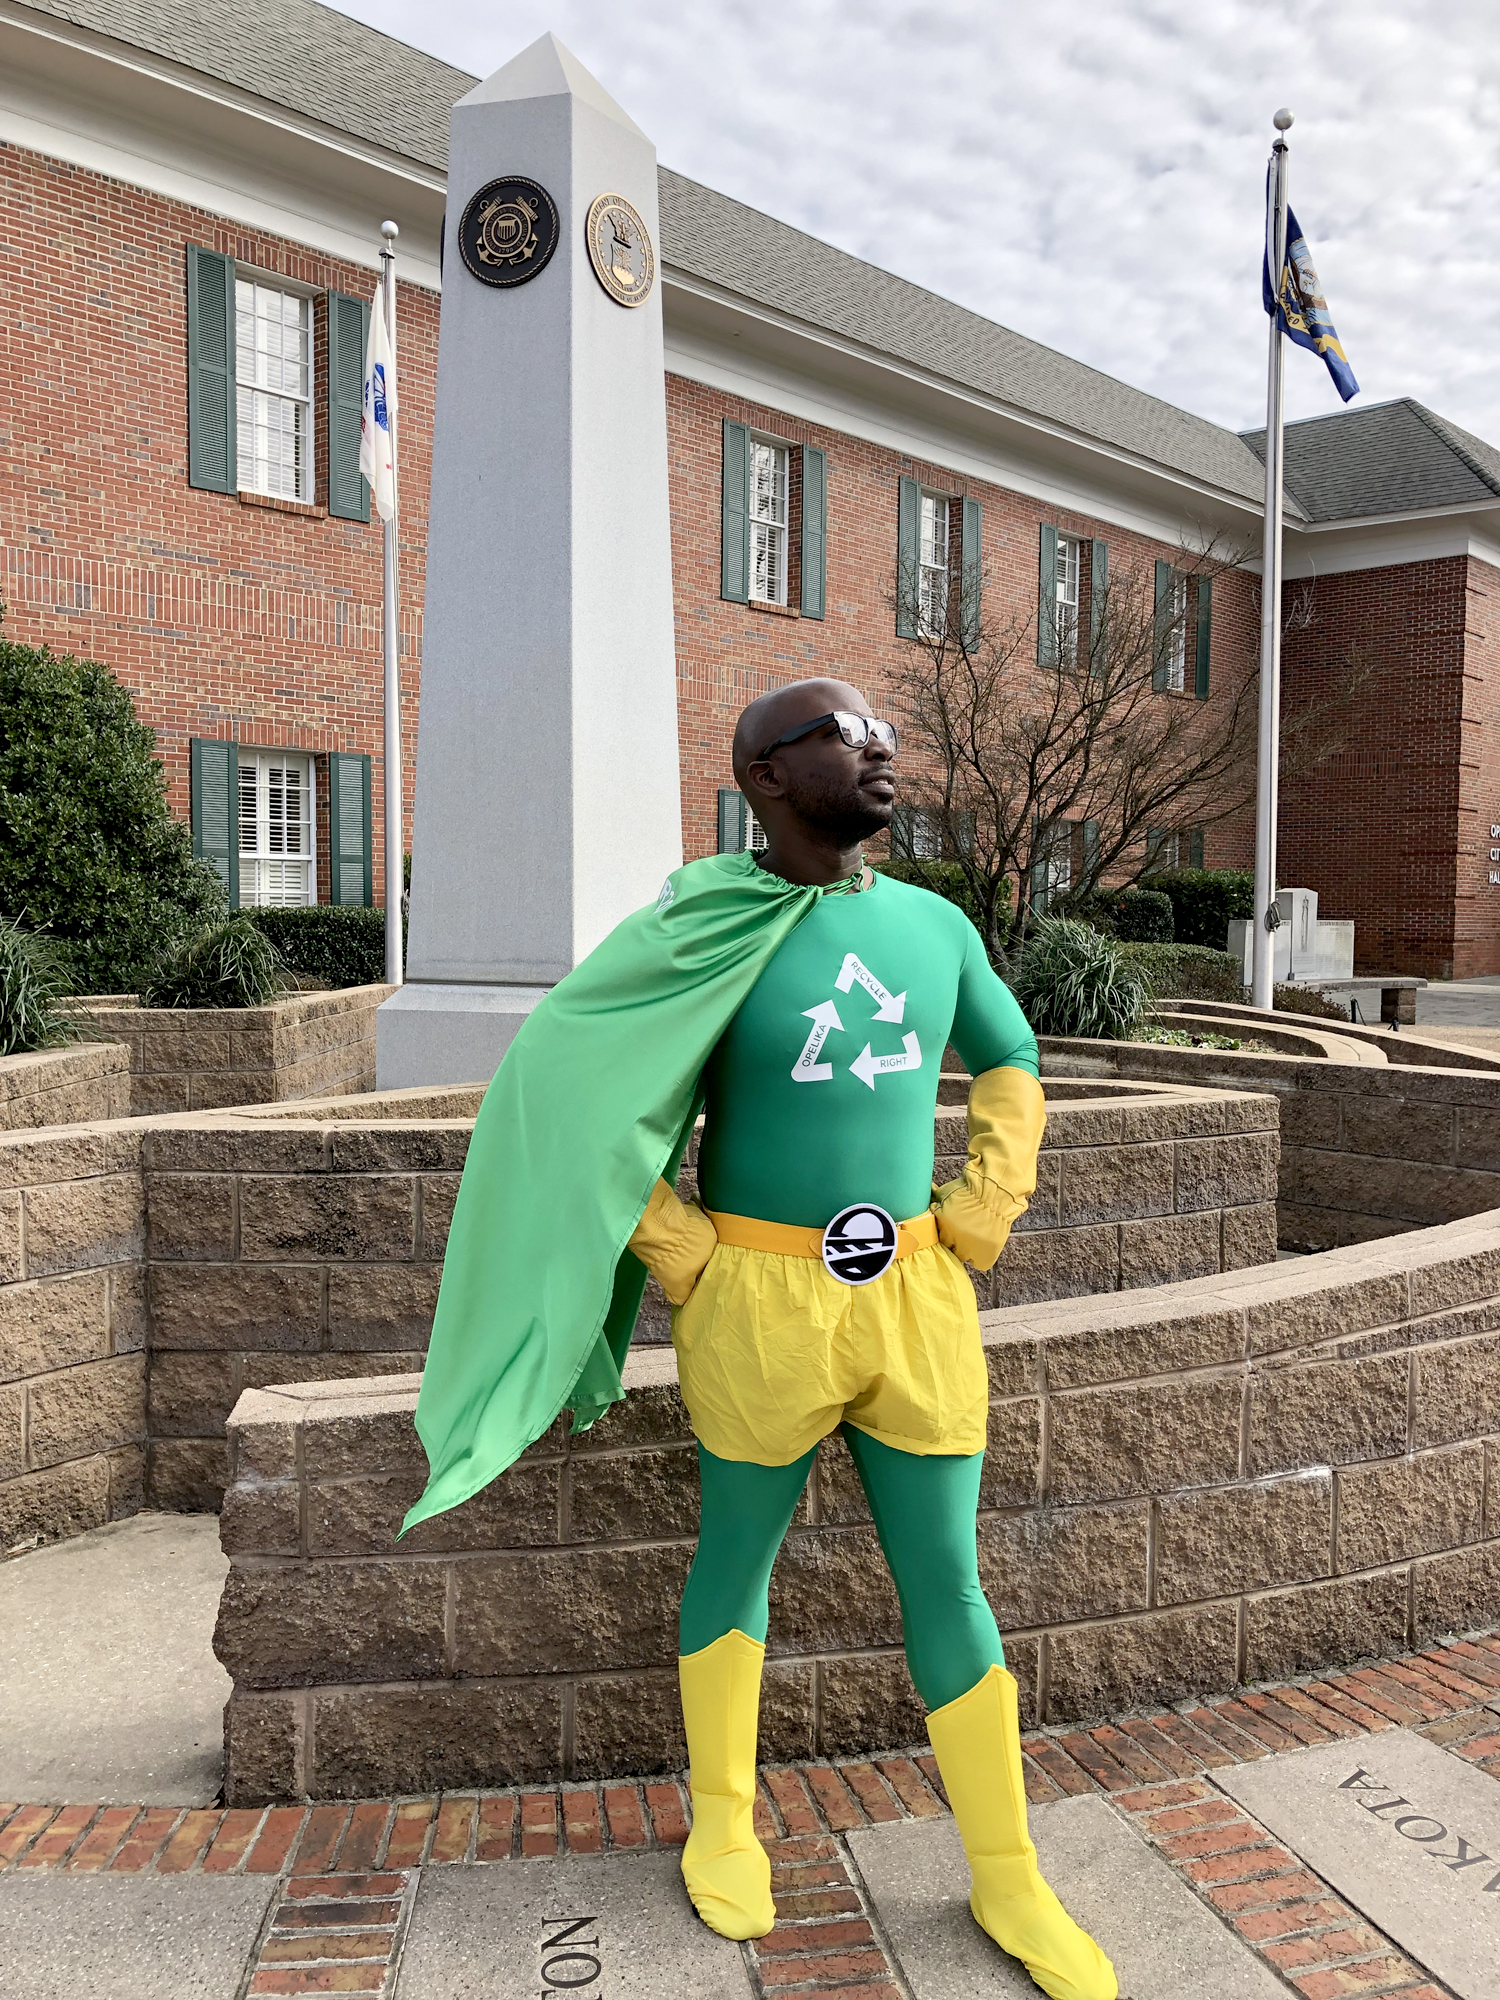 City Of Opelika announces new recycling campaign, superhero